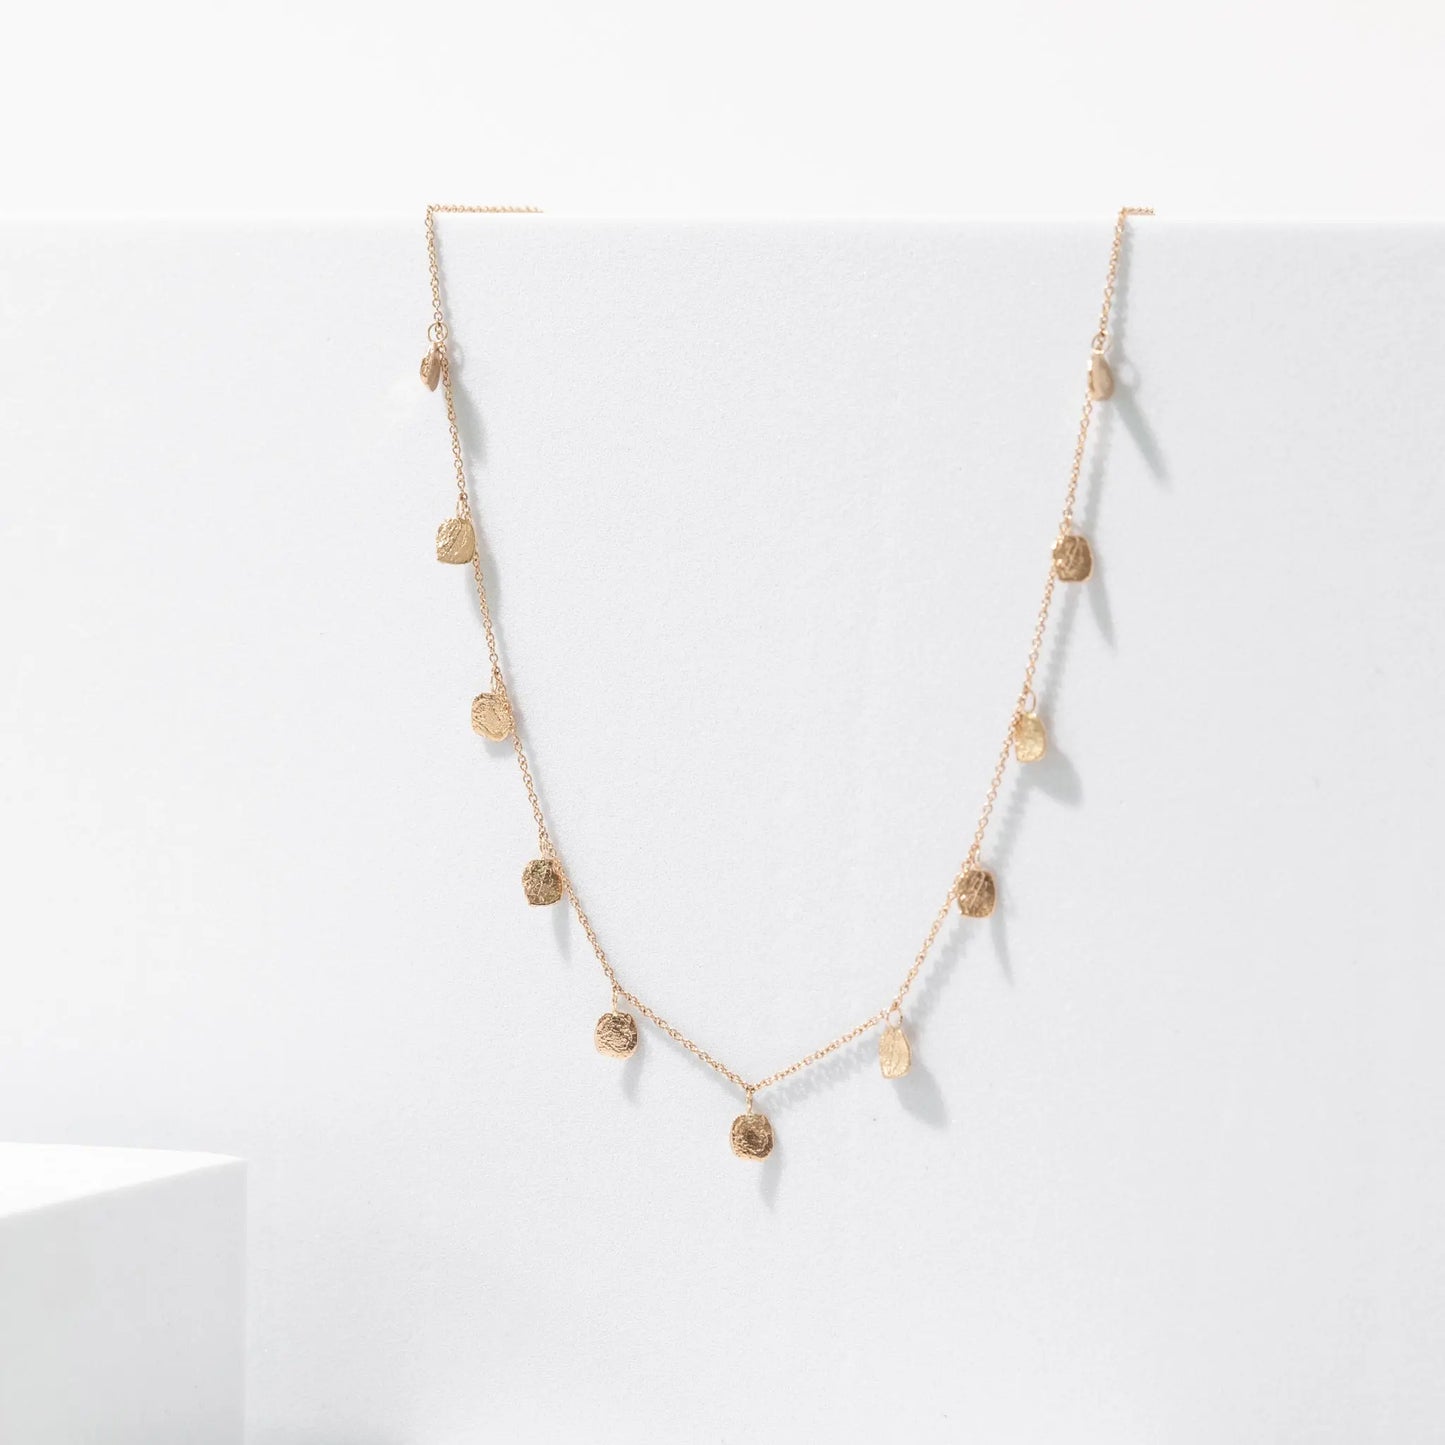 Birch Drip Necklace Mary Frances Maker